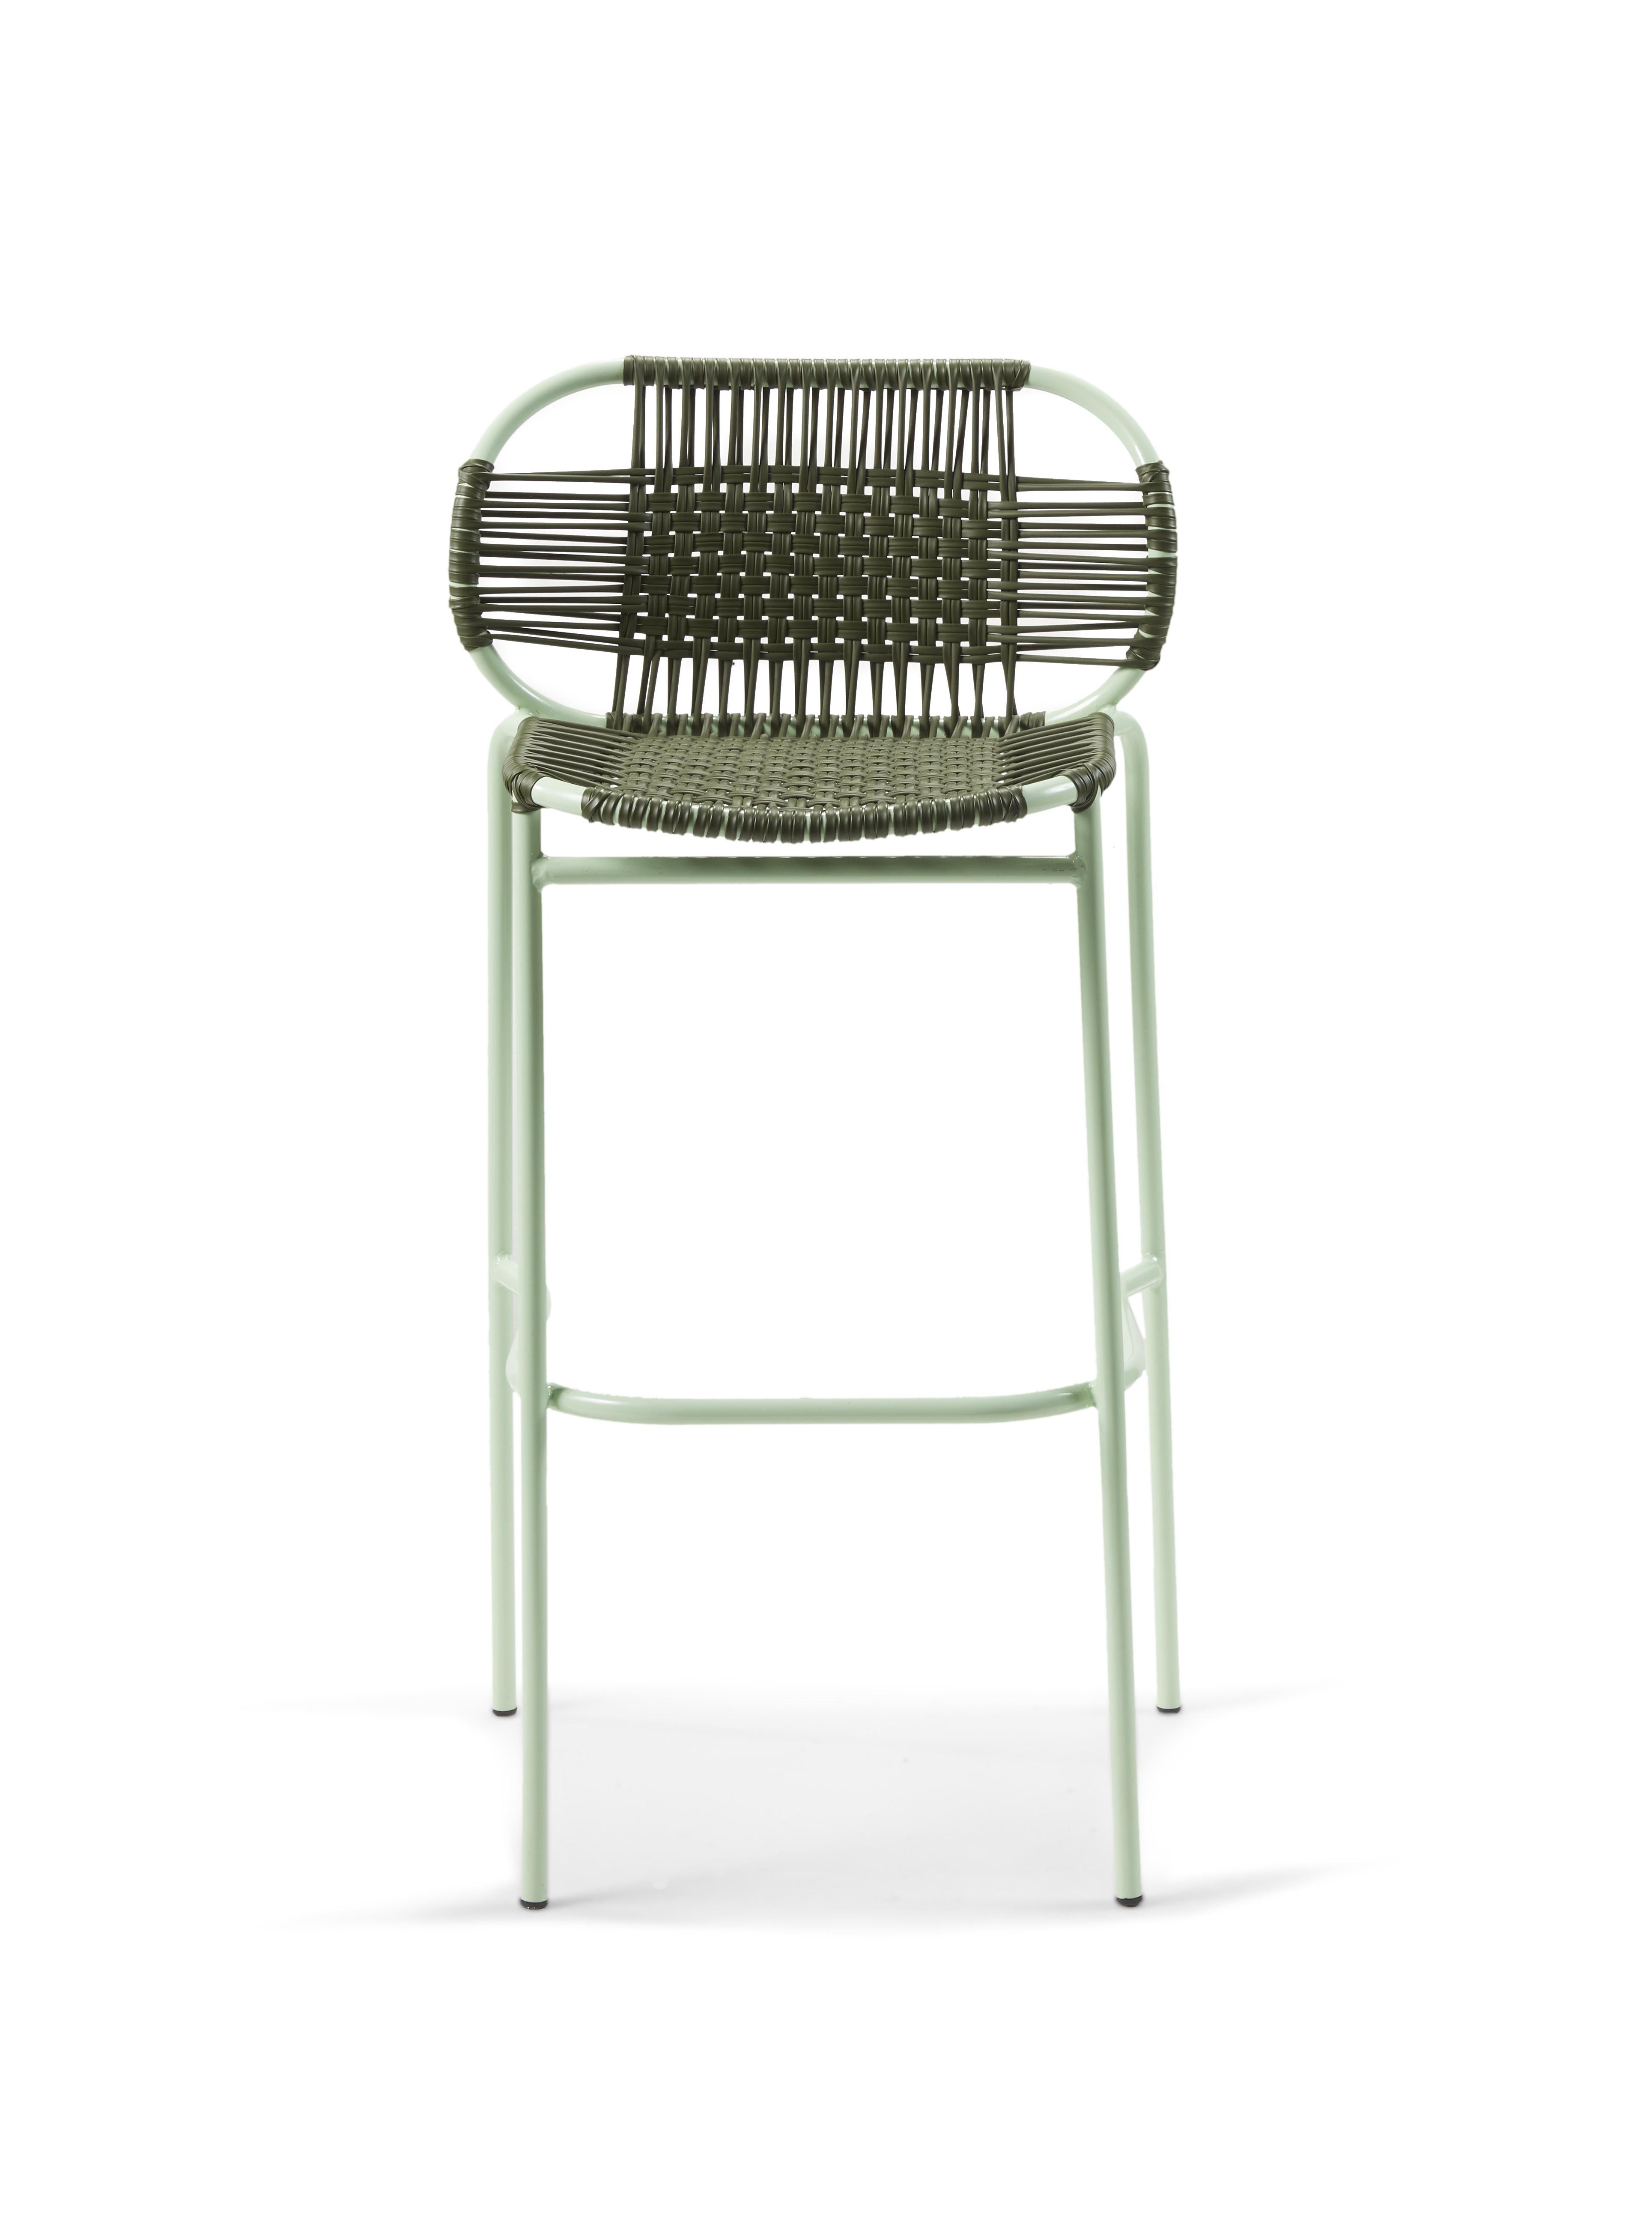 Set of 2 olive Cielo bar stool by Sebastian Herkner
Materials: galvanized and powder-coated tubular steel. PVC strings are made from recycled plastic.
Technique: made from recycled plastic and weaved by local craftspeople in Cartagena, Colombia.